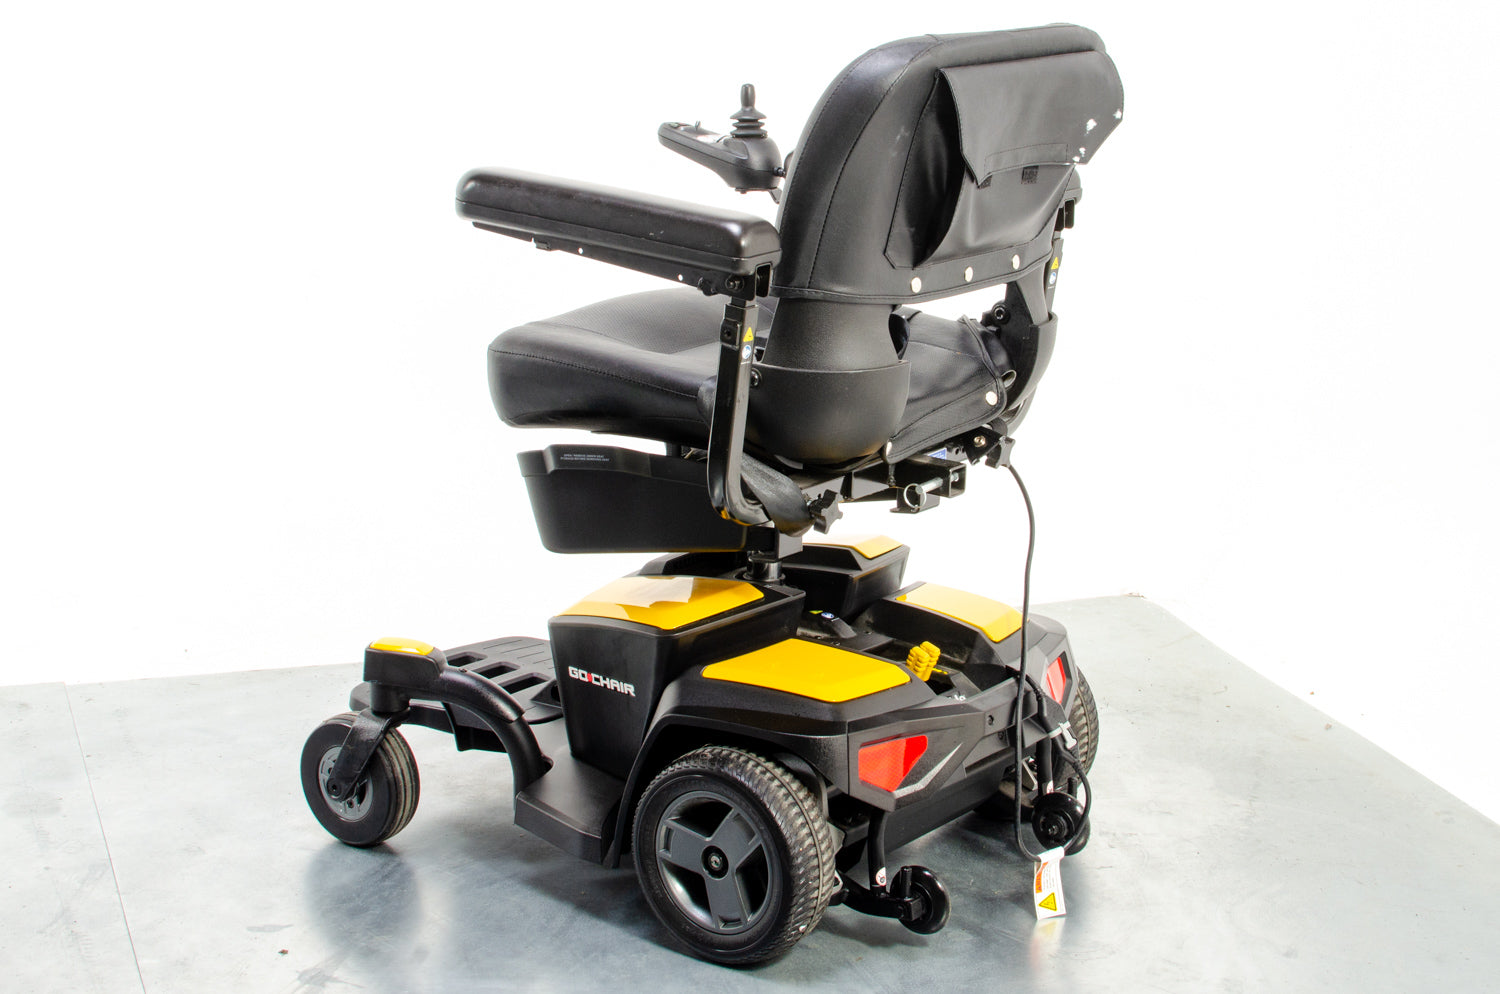 Pride Go Chair Small Compact Indoor Powerchair Electric Wheelchair Travel Transportable Yellow